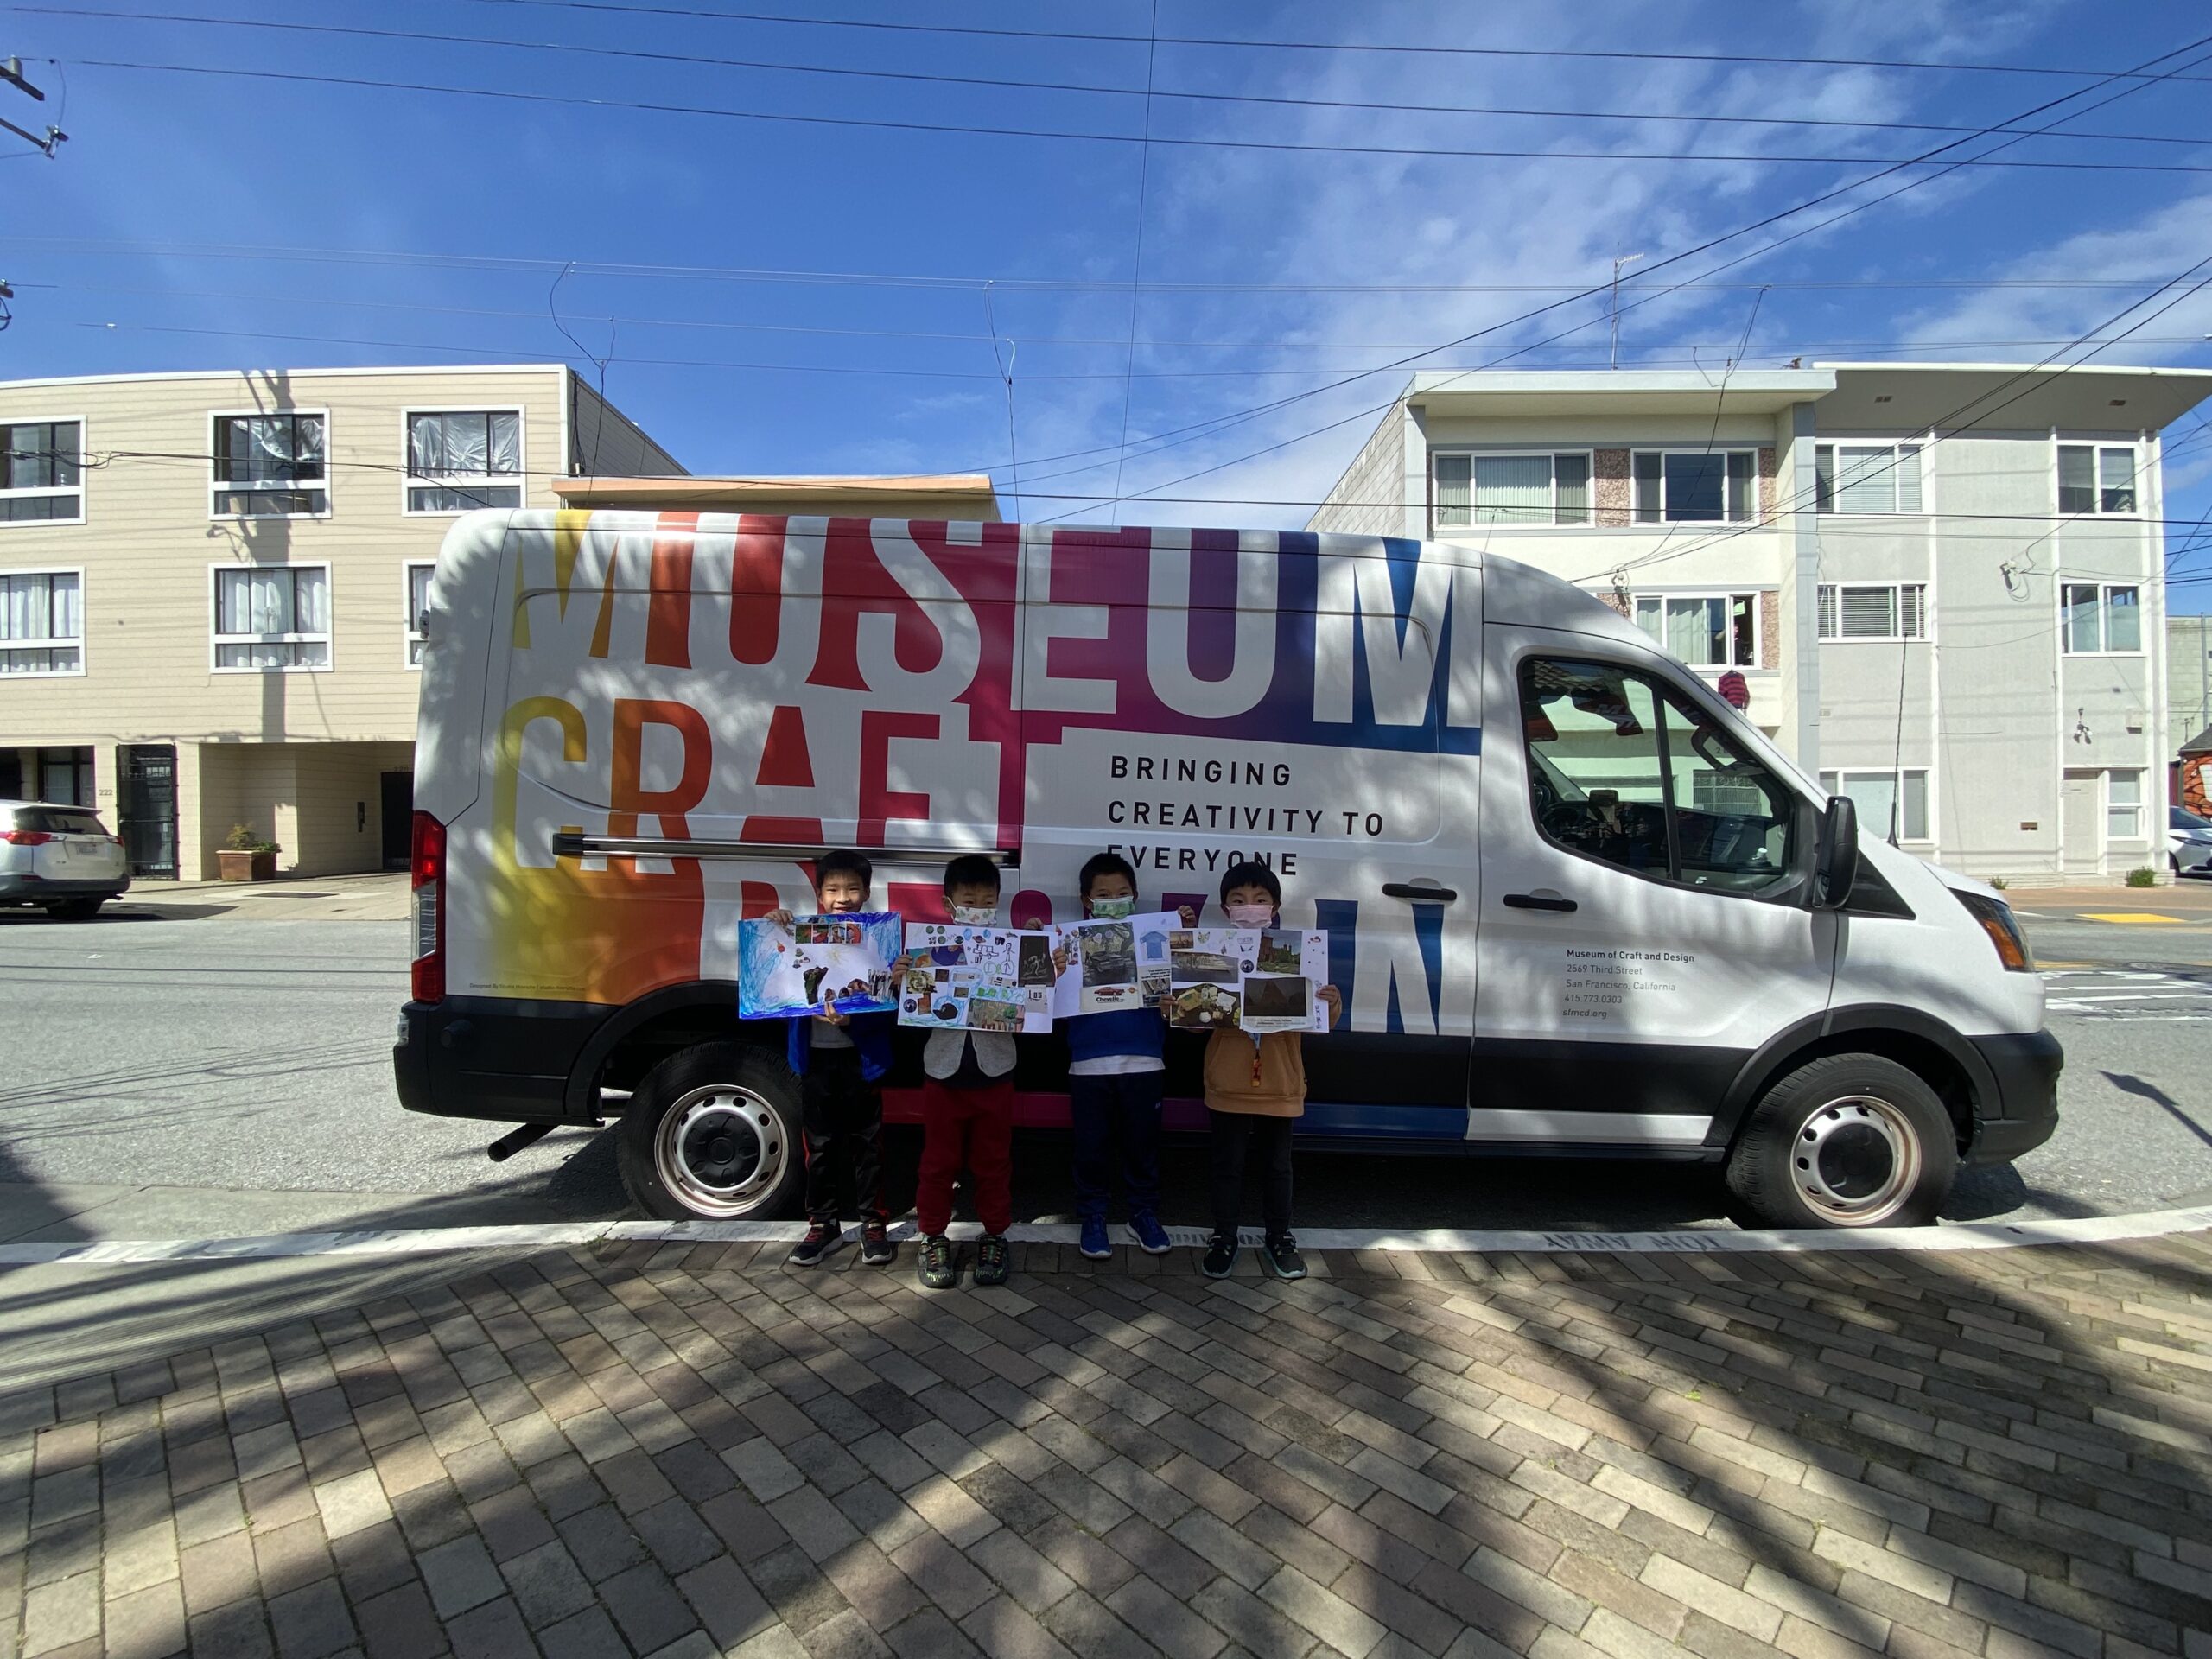 Four kids holding up their artwork standing in front of a van with the Museum of Craft and Design's logo on it.